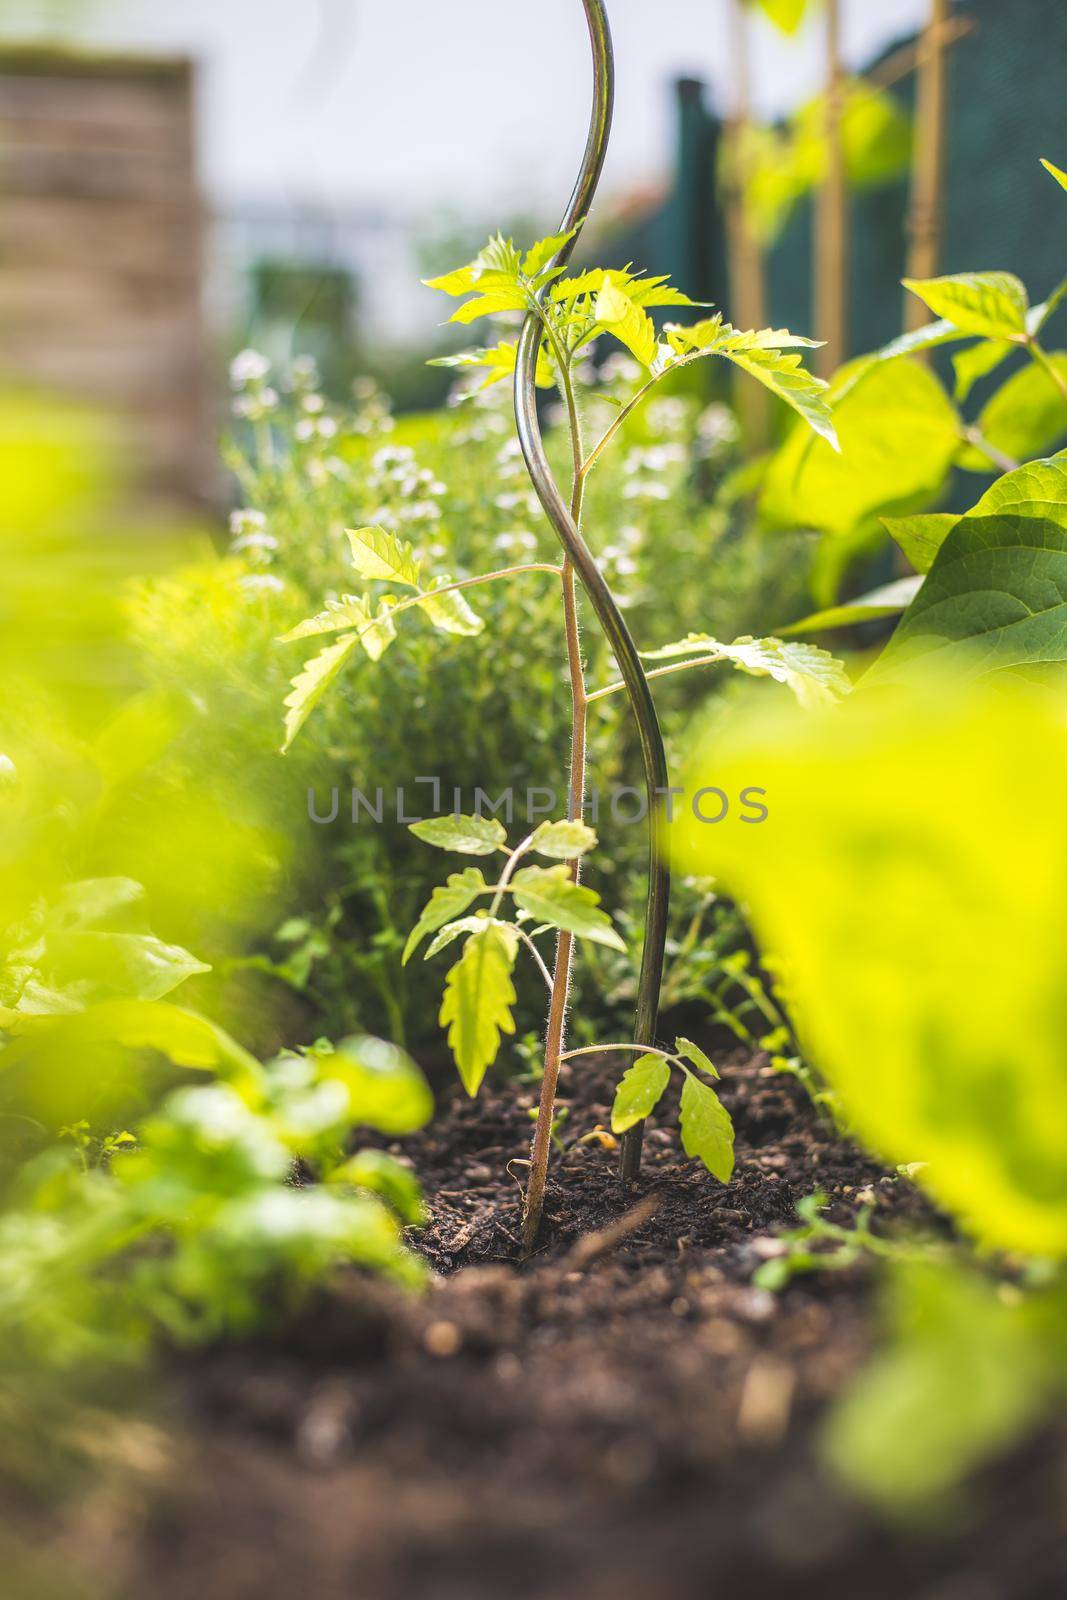 Tomato planting in the raised bed: young plants are growing in the sunlight by Daxenbichler